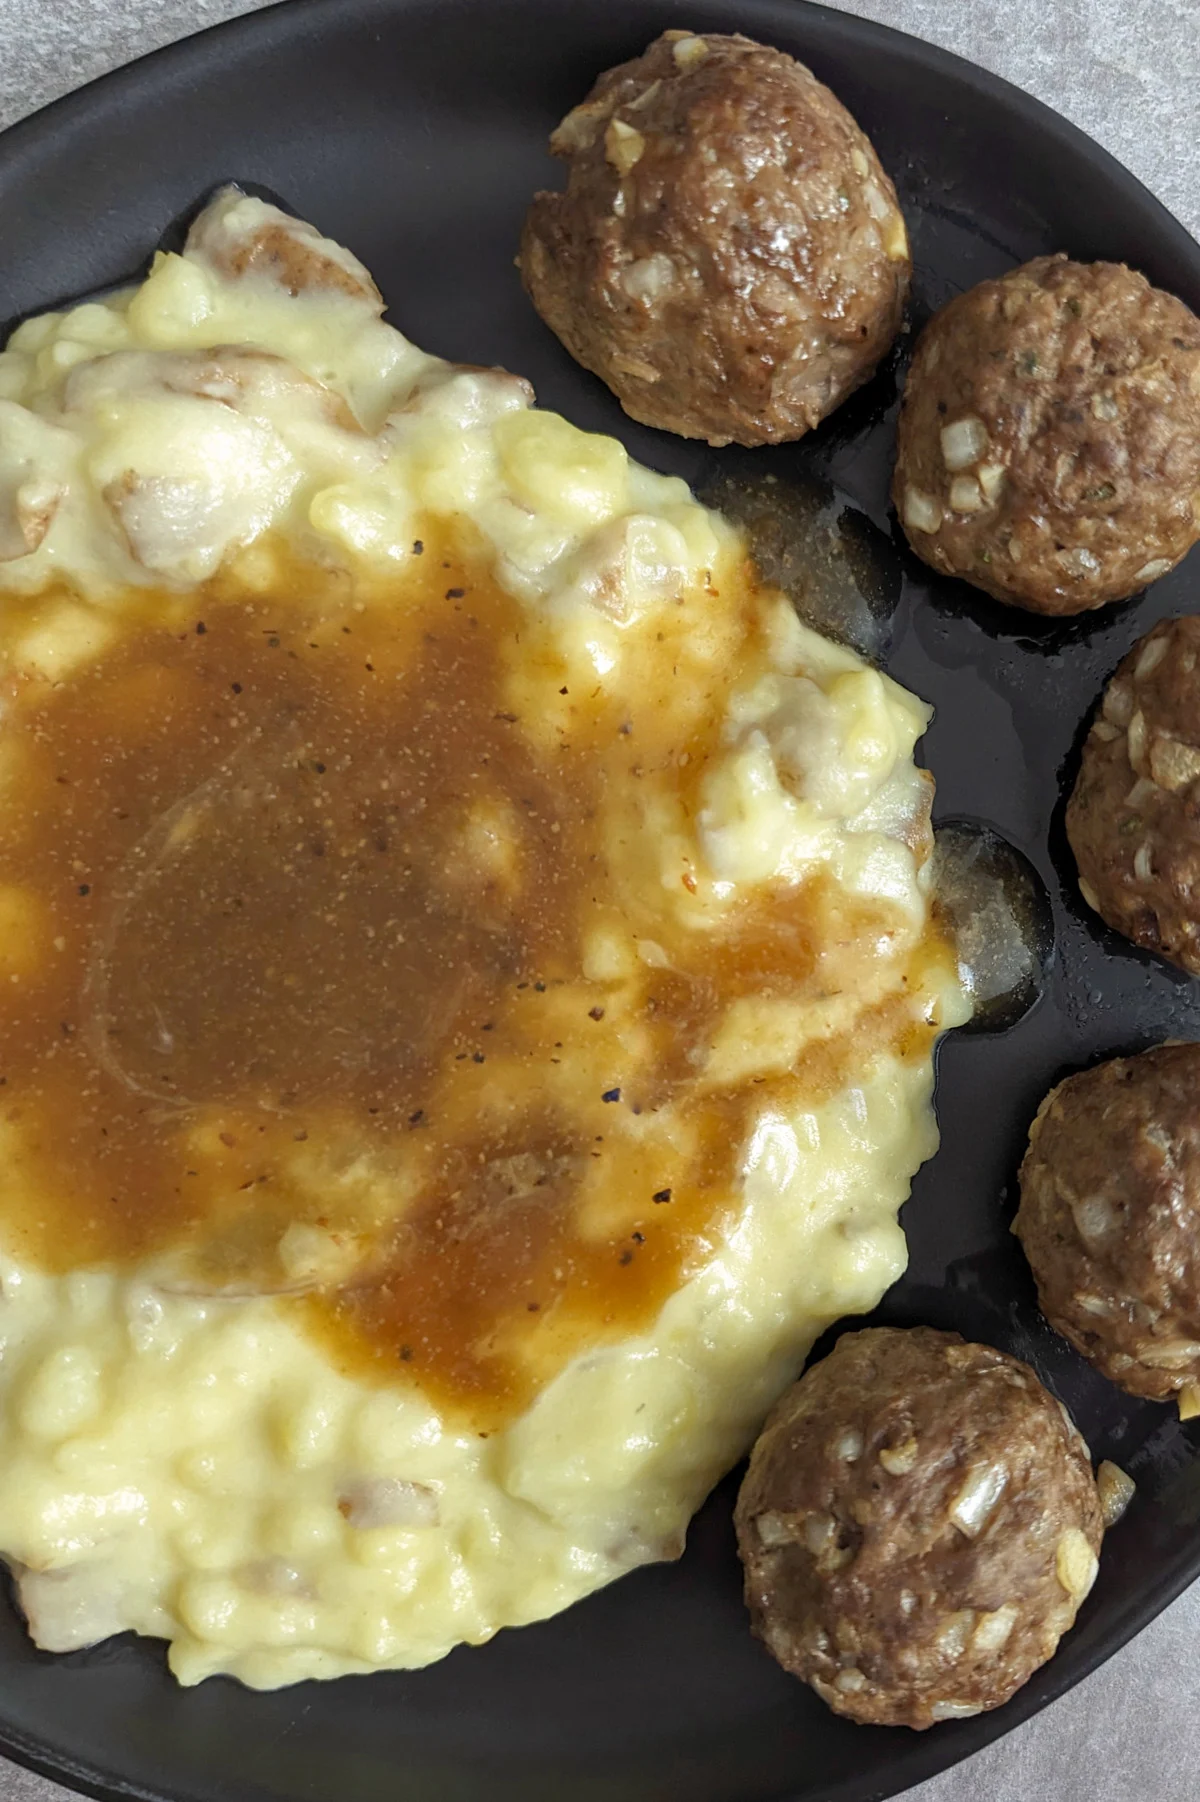 Meatballs and mashed potatoes with homemade brown gravy.